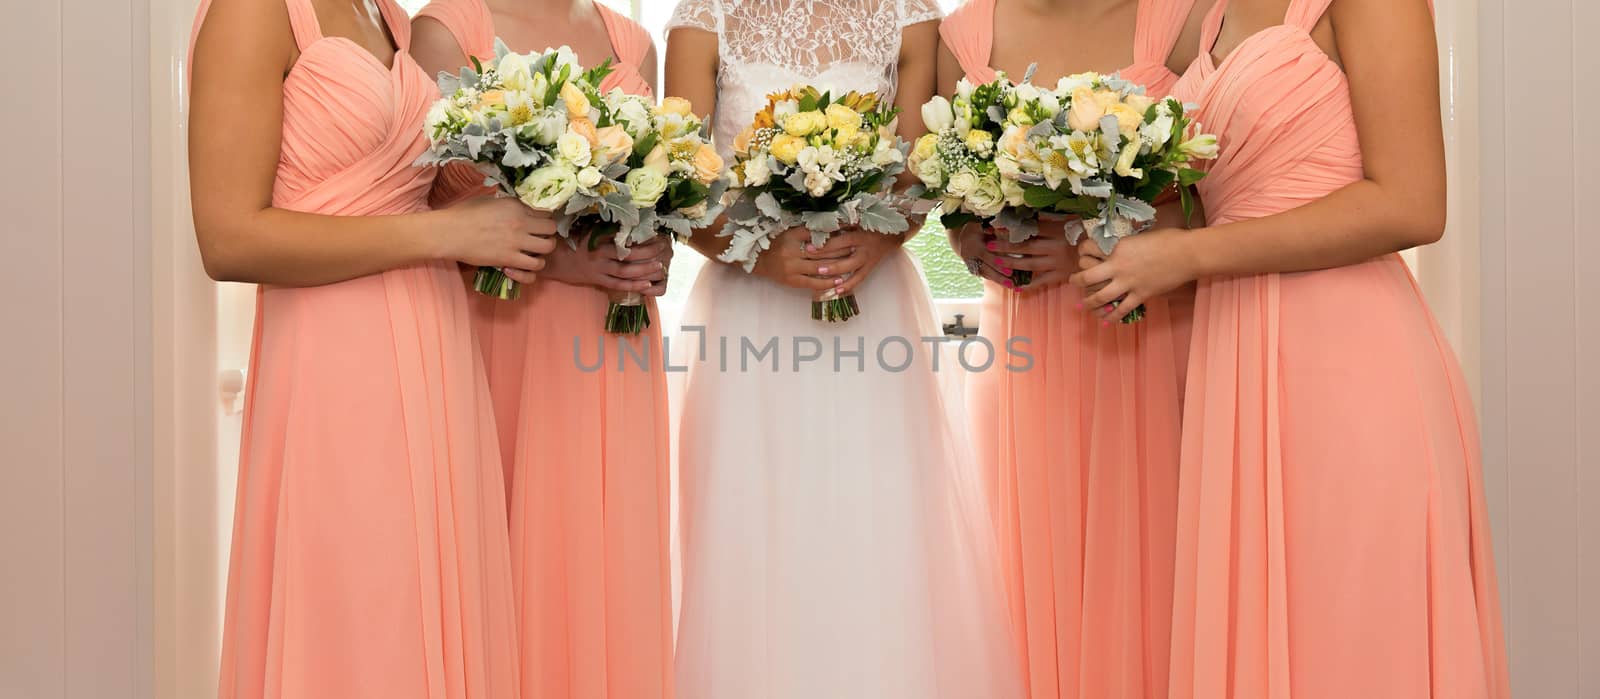 A bride with her bridesmaids all holding their bouquets and posing prior to the wedding ceremony